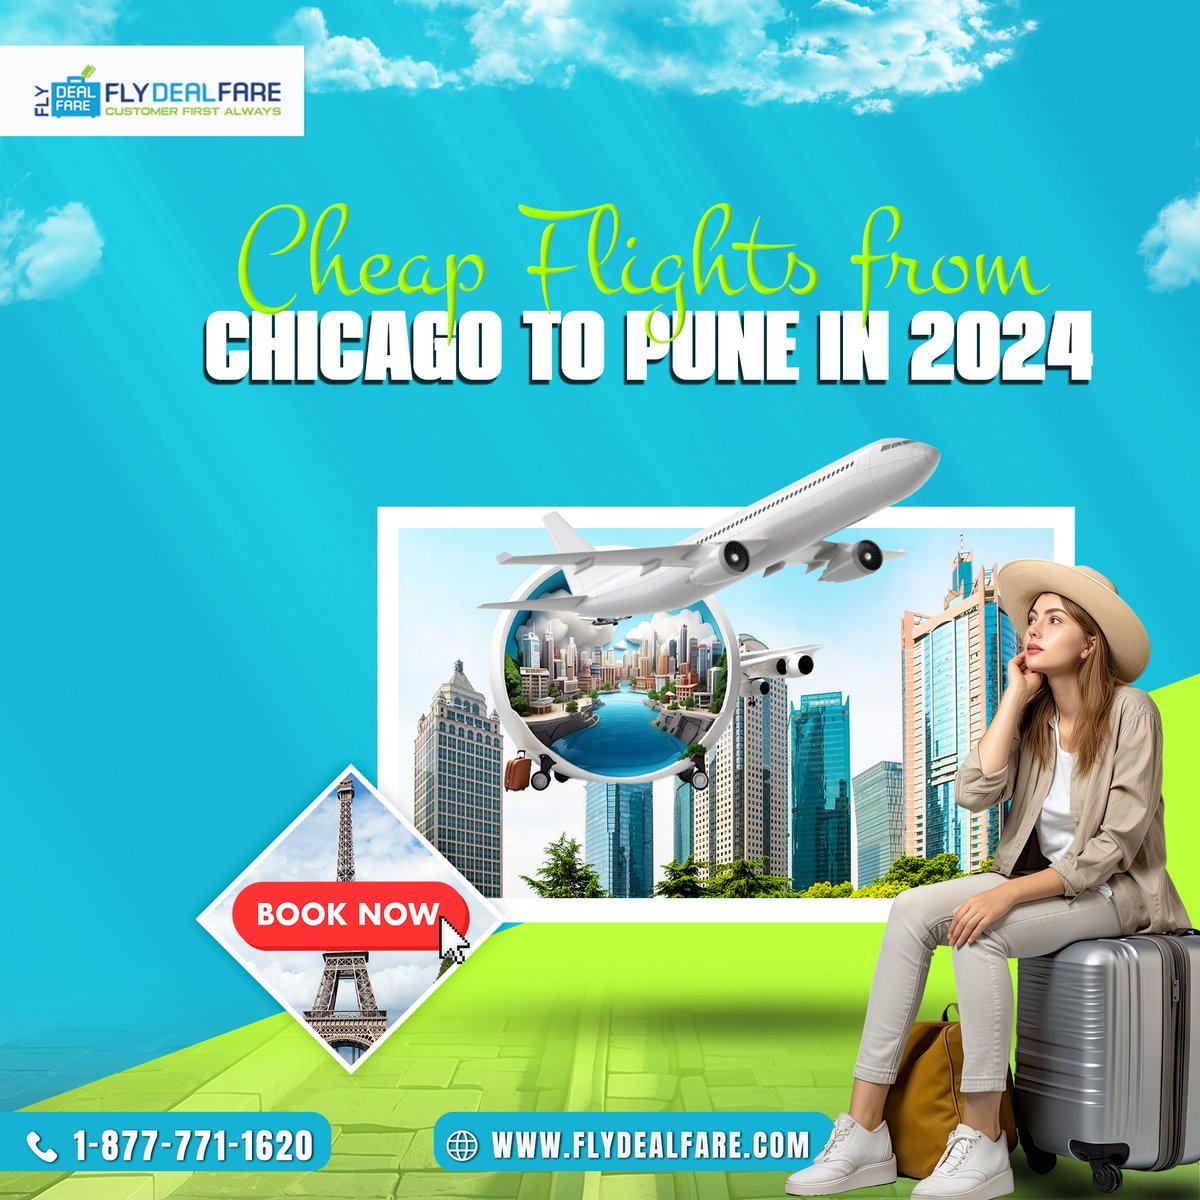 Find the best deals on Chicago to Pune flights with FlyDealFare. Discover affordable fares, convenient flight schedules, and excellent service.

Know more @ flydealfare.com/flights-to-ind…
.
.
.
#flydealfare #chicagotopune #usatoindia #flightoffers
#affordableflights #flightdiscounts